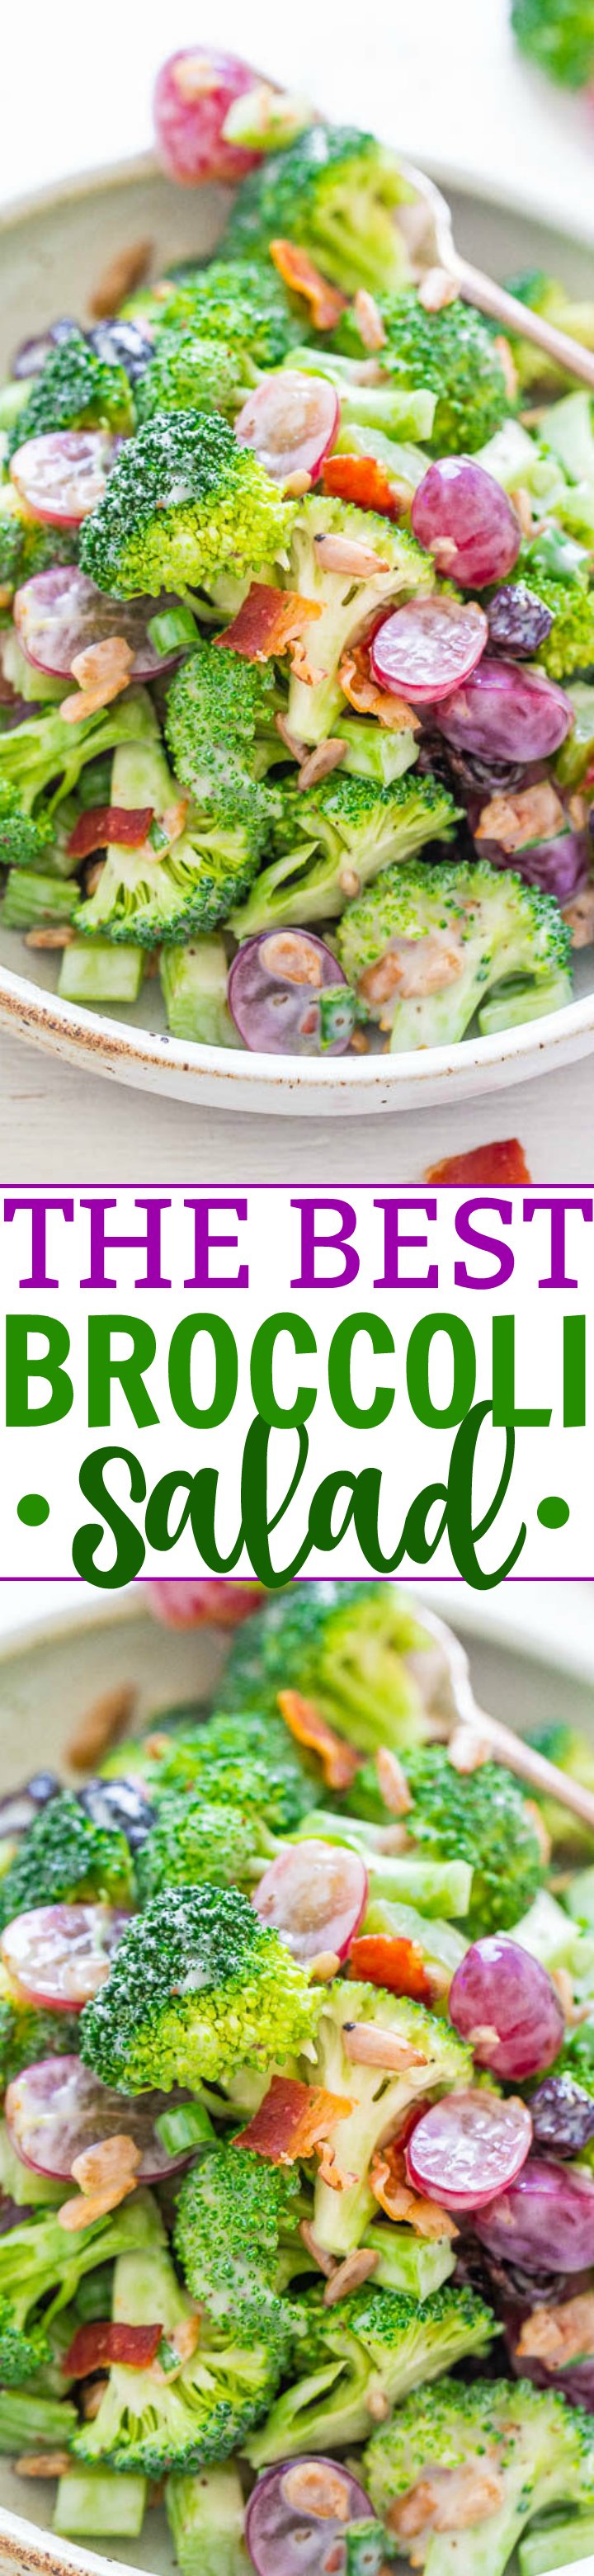 The Best Broccoli Salad - My FAVORITE recipe for the classic salad with a tangy dressing that everyone LOVES!! Flavor and texture galore in this EASY salad that's perfect for parties, picnics, and potlucks!!